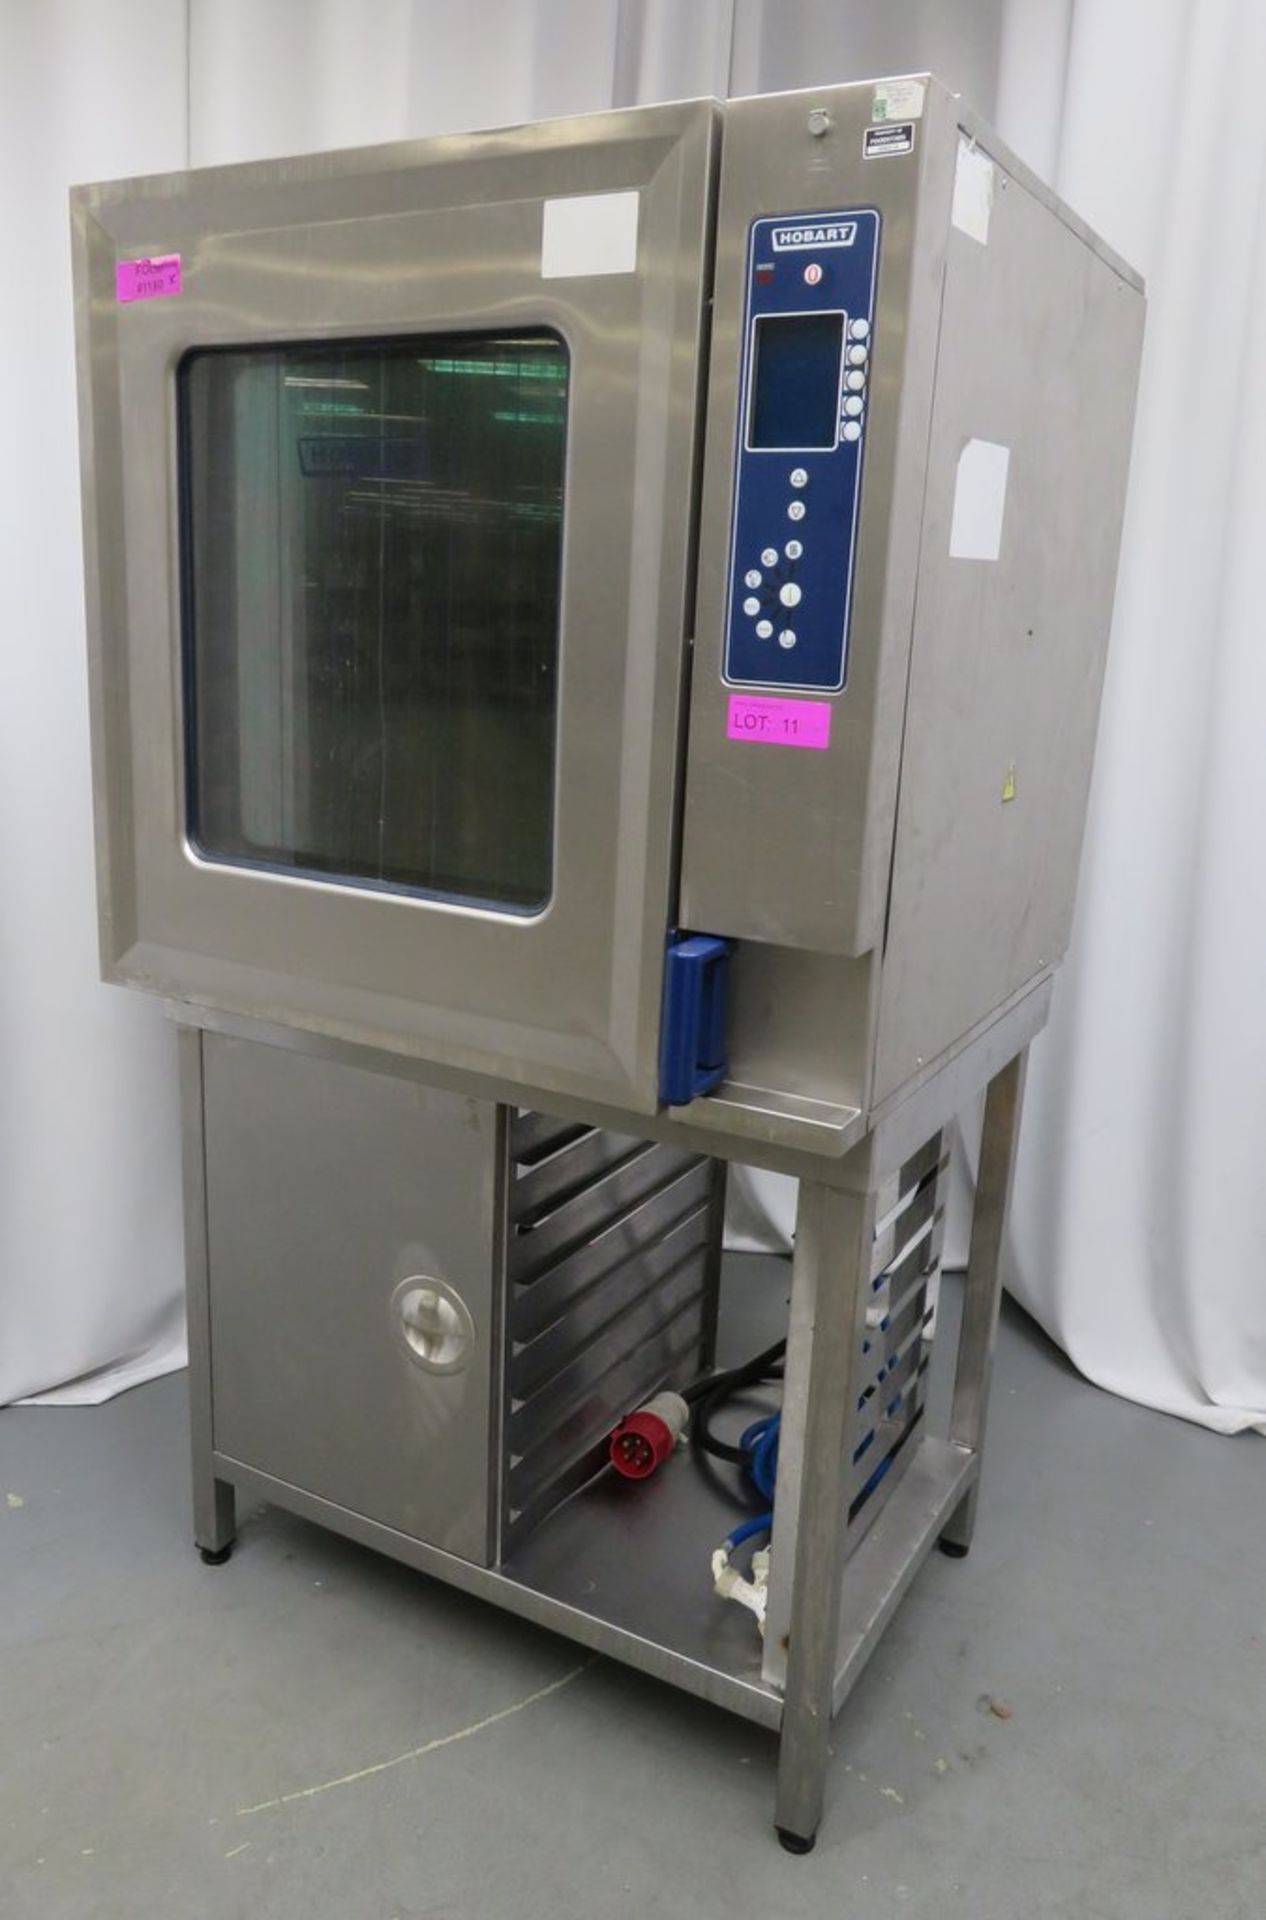 Hobart CSD UC 10 grid combi oven, 3 phase electric - Image 3 of 9